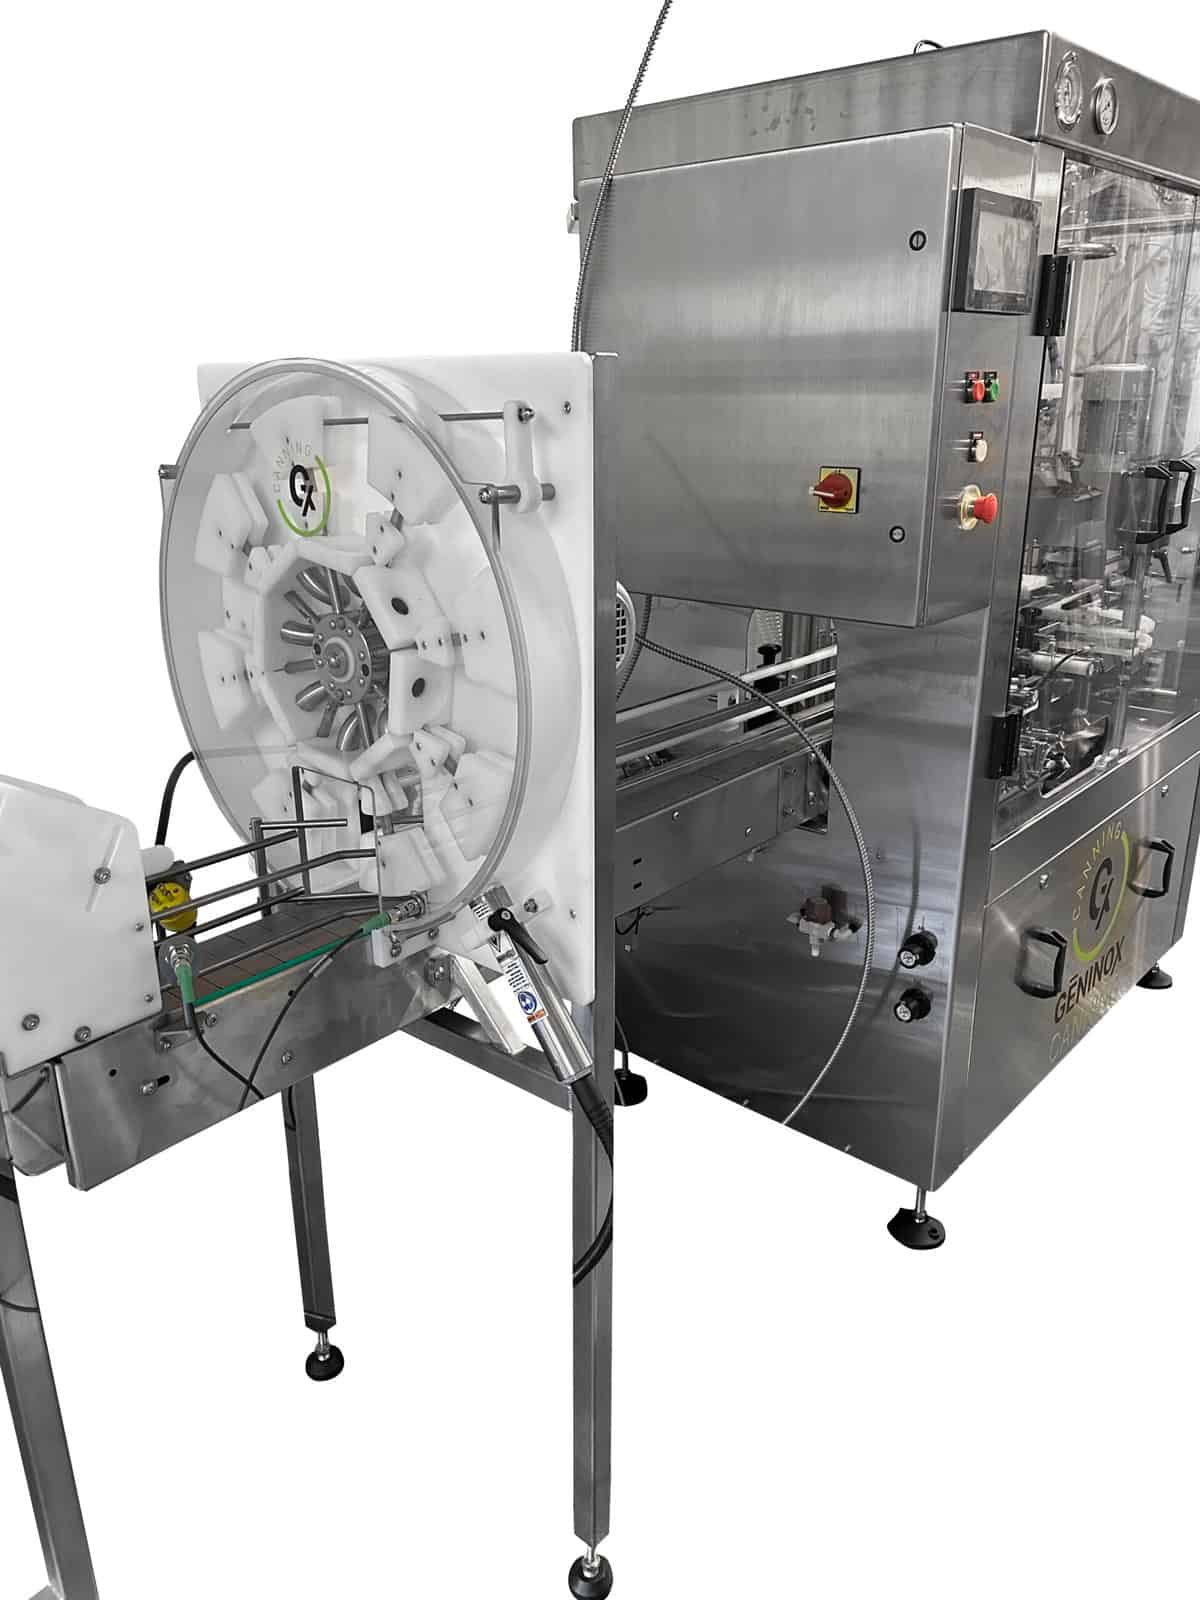 Full view of the compact atmospheric canning machine in a production facility